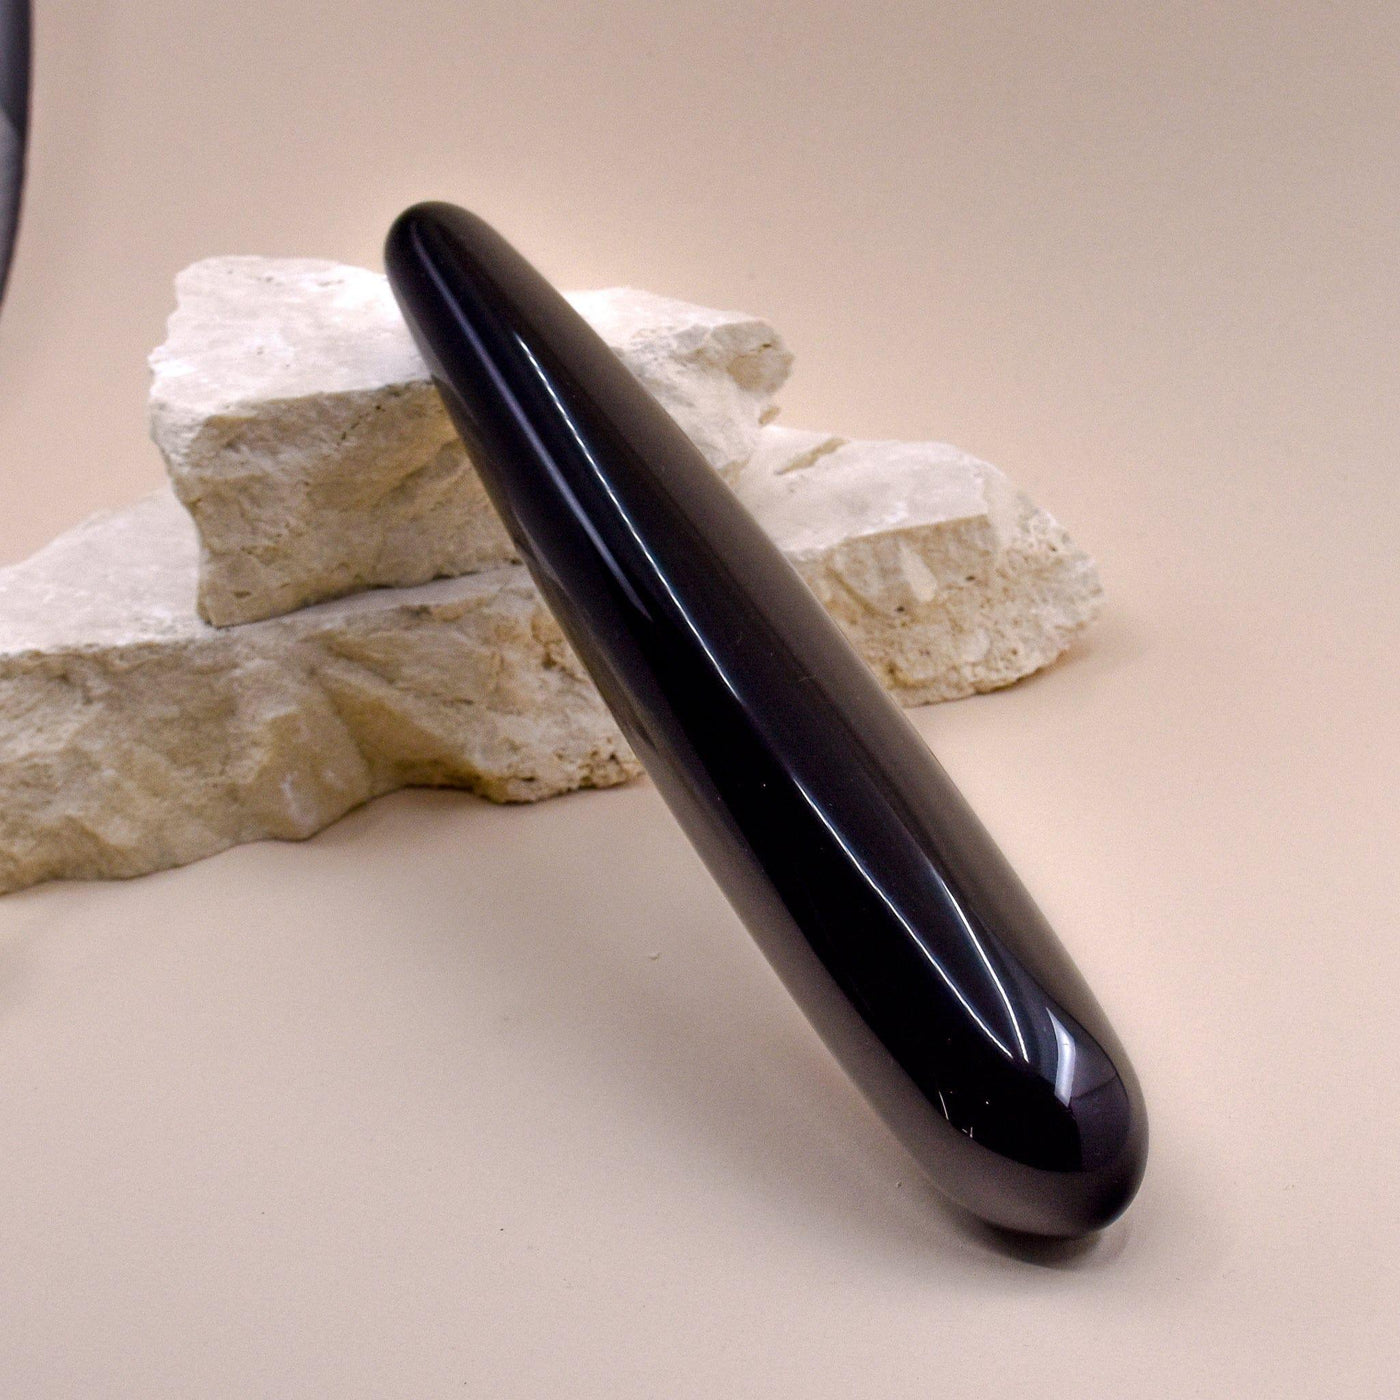 Zeus Jnr Black Obsidian Wand - Wands of Lust Co